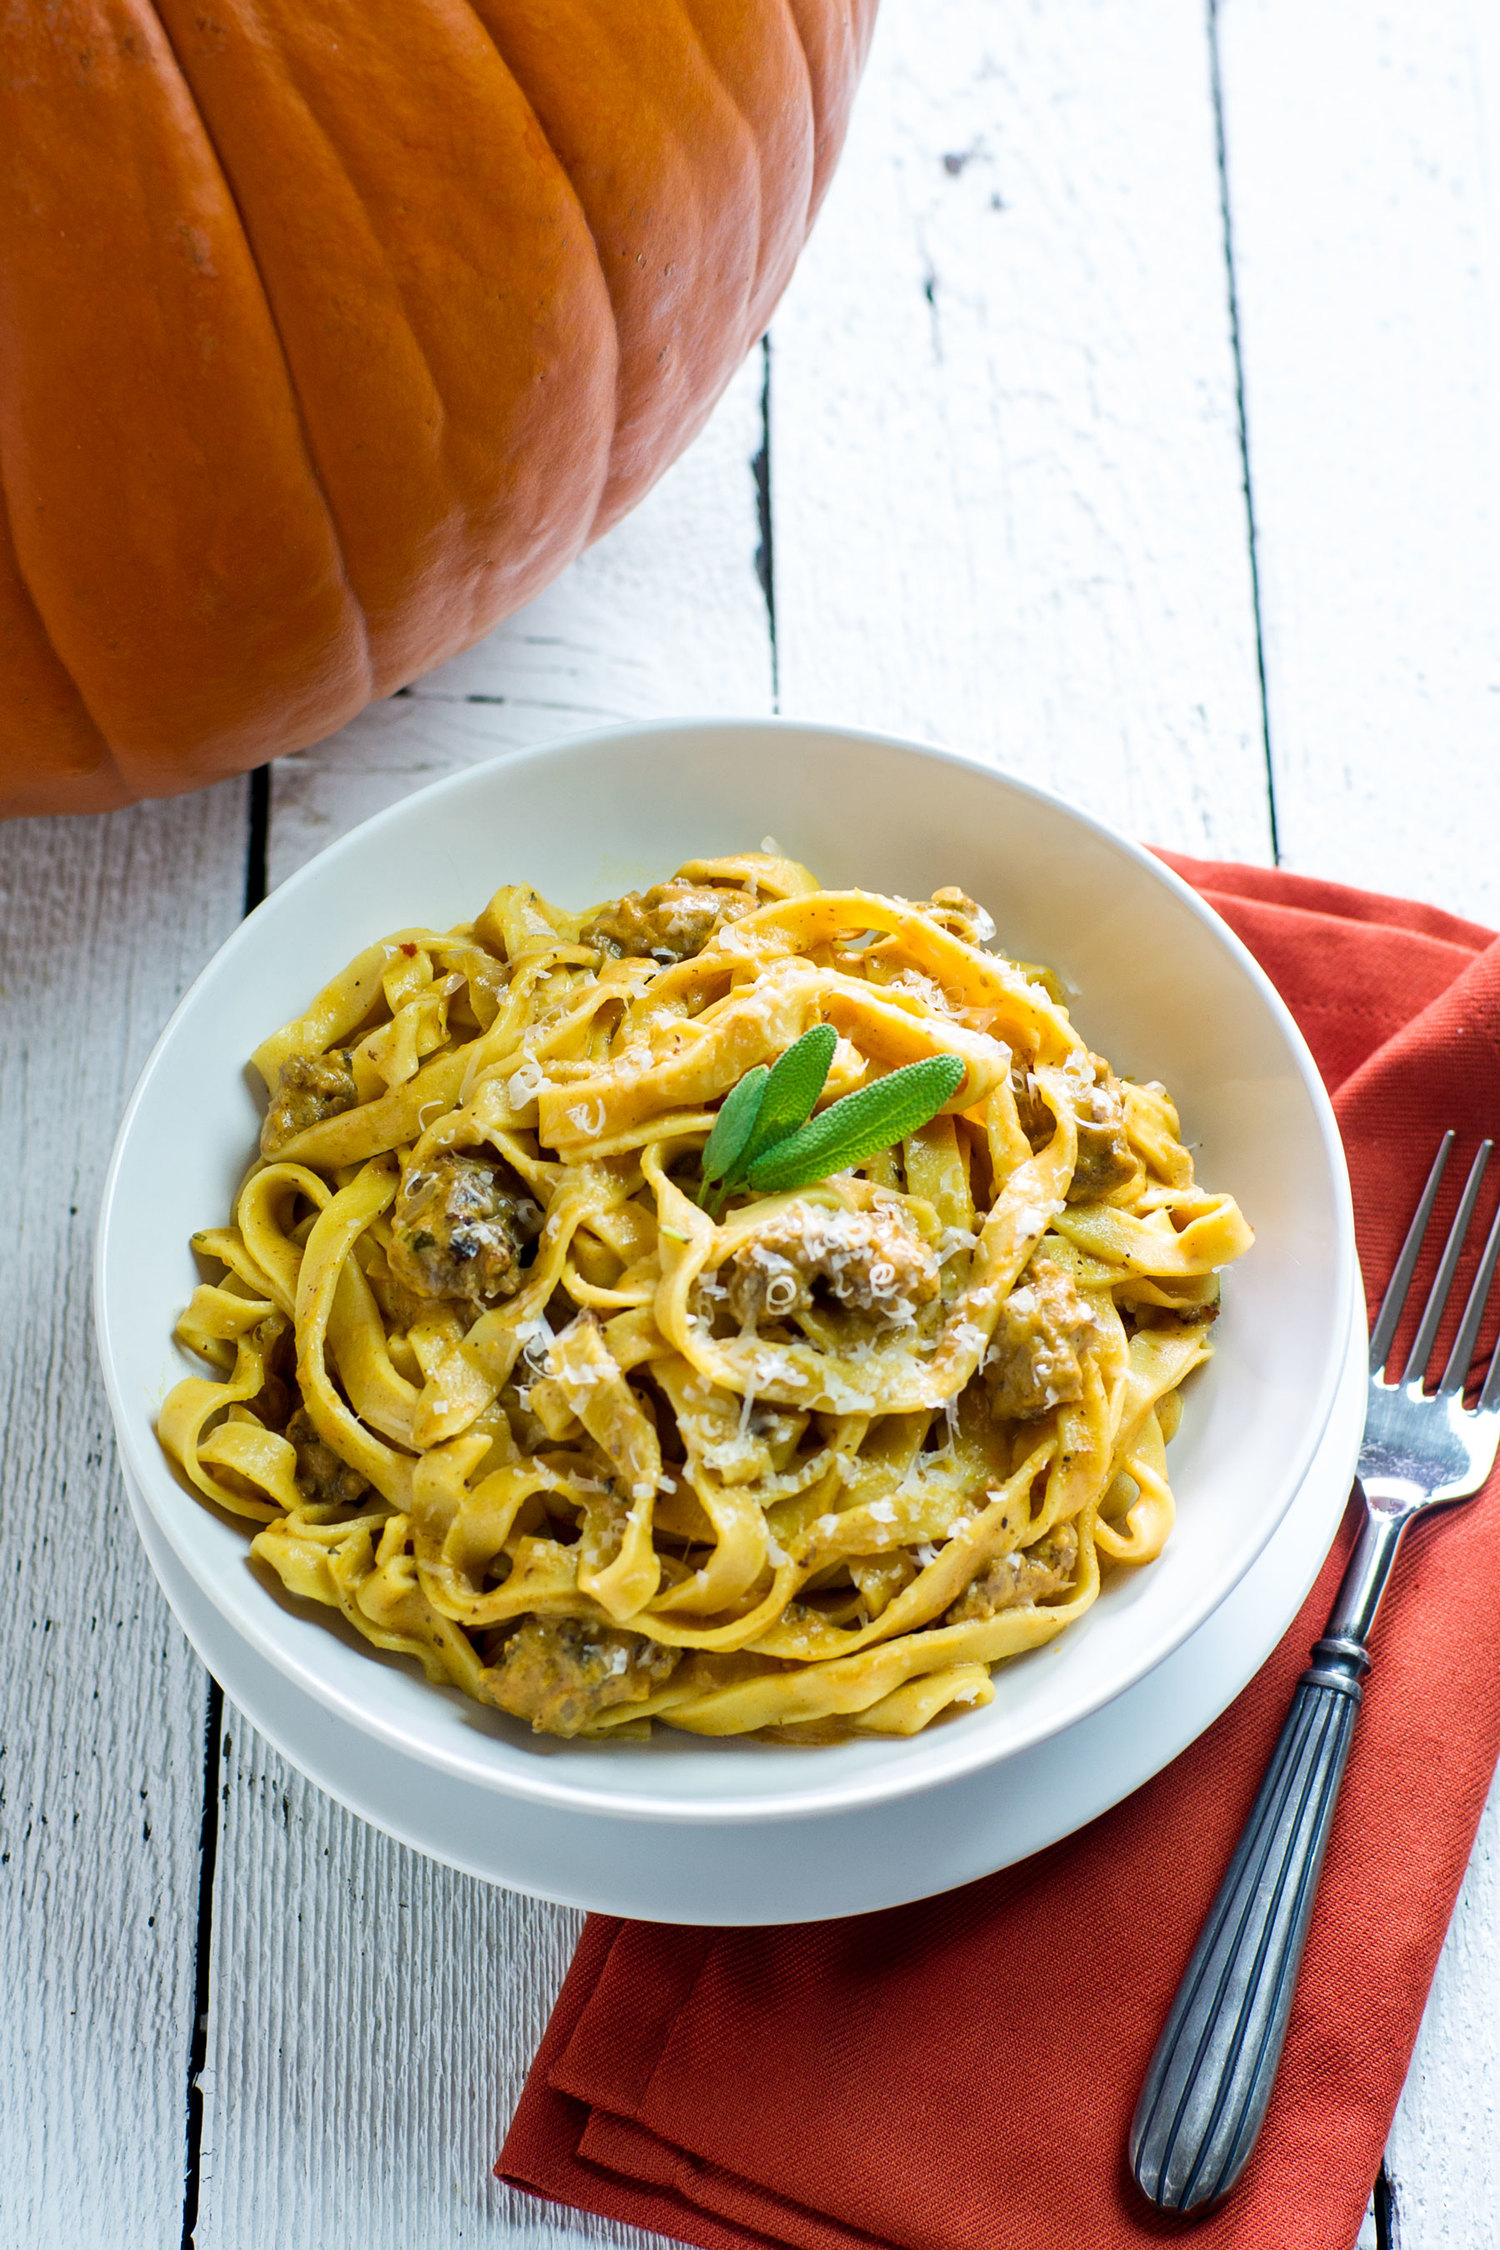   Pumpkin Fettuccine with Sausage and Sage by Sam Henderson of Today's Nest  